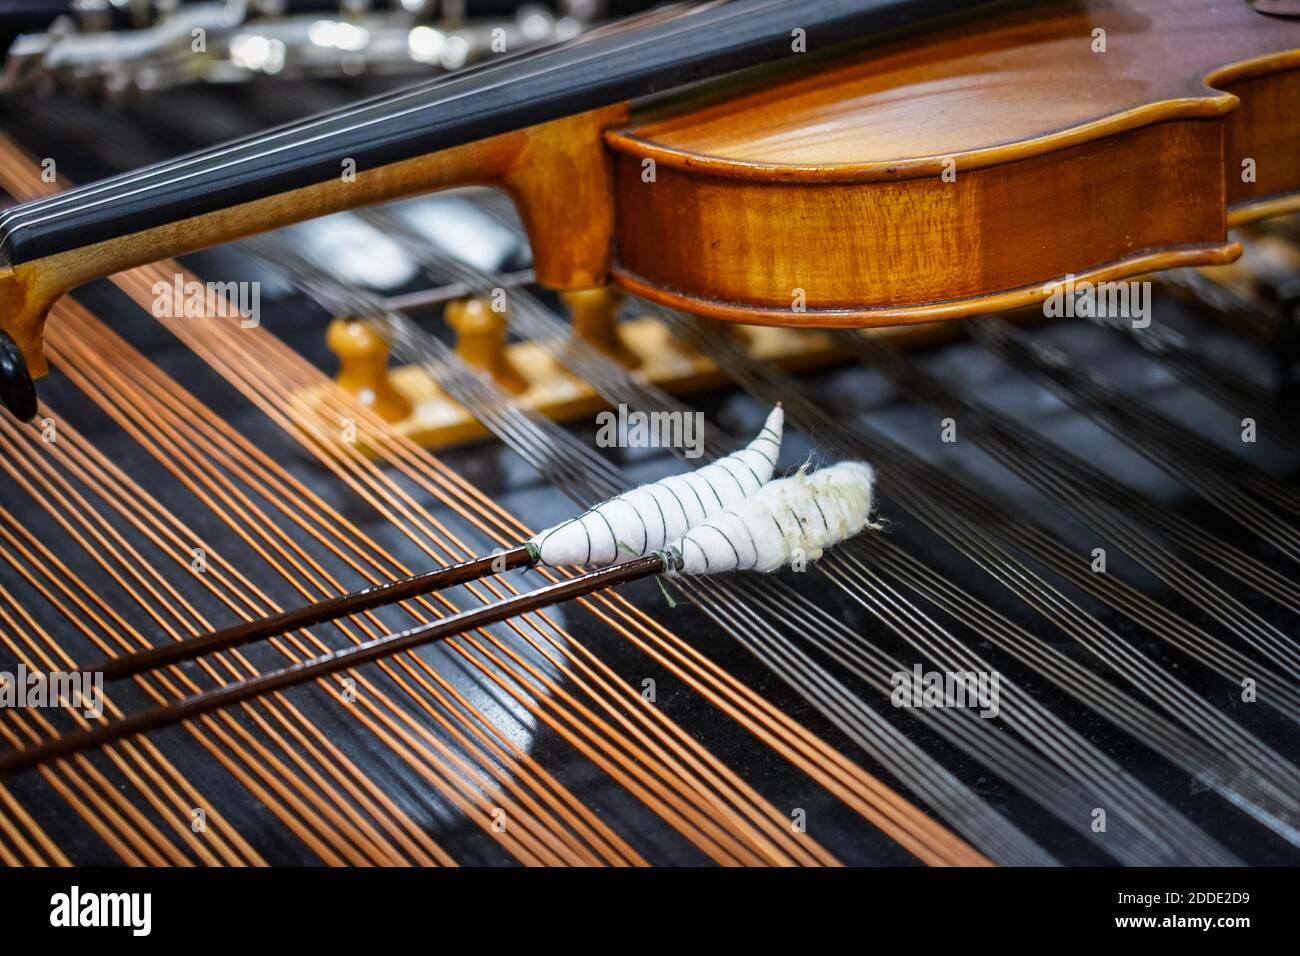 Close up of dulcimer strings and drumsticks with lying violins. Music concept background Stock Photo